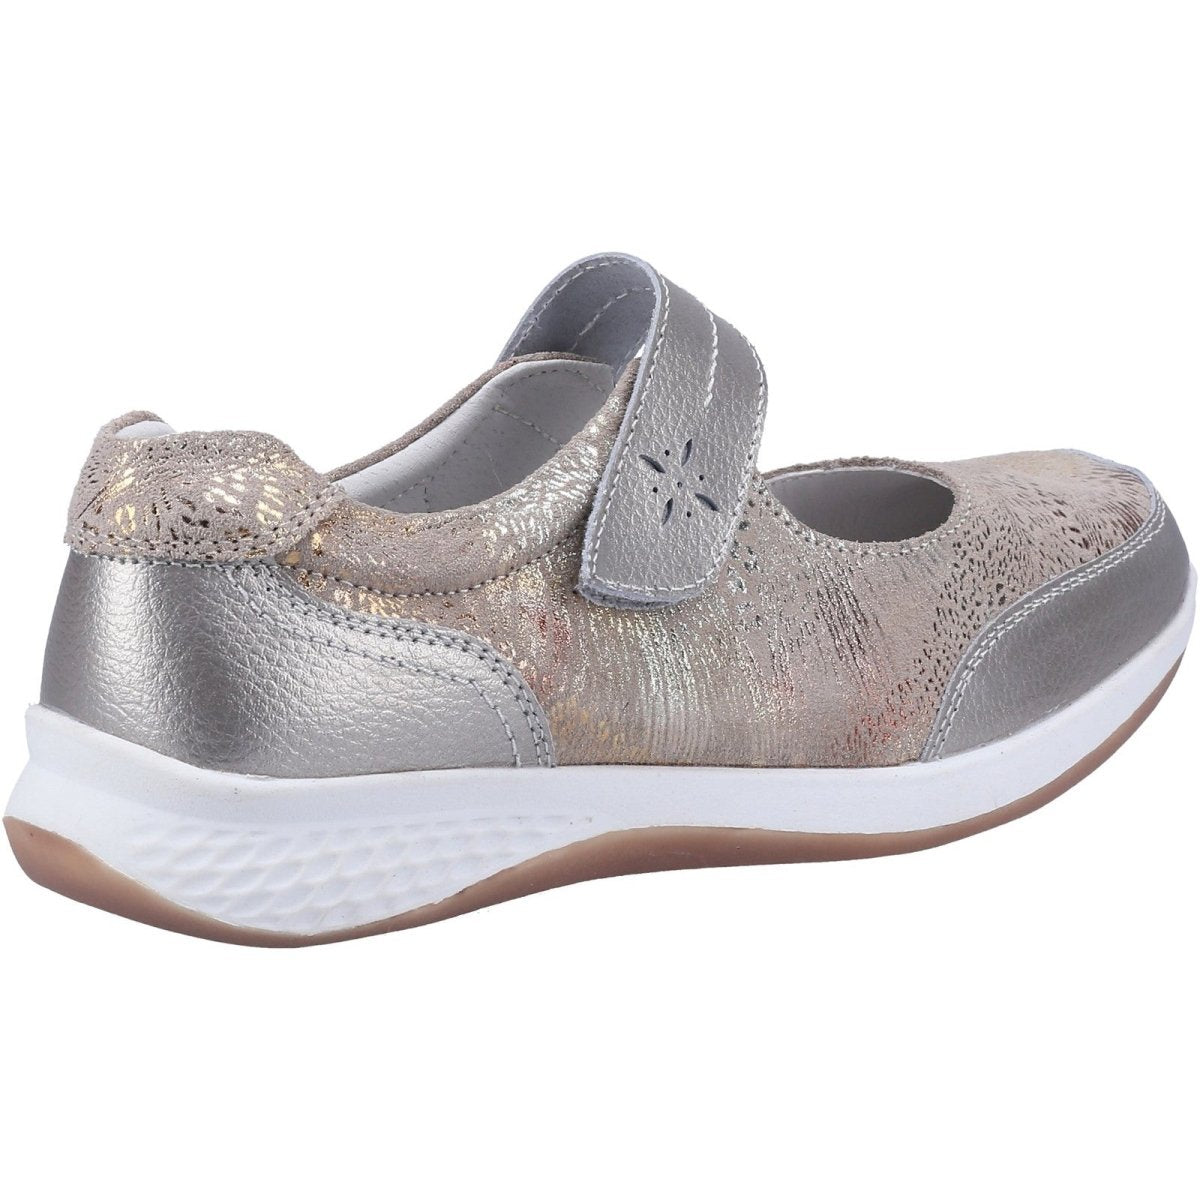 Fleet & Foster Laura Ladies Mary Jane Touch-Fastening Shoes - Shoe Store Direct